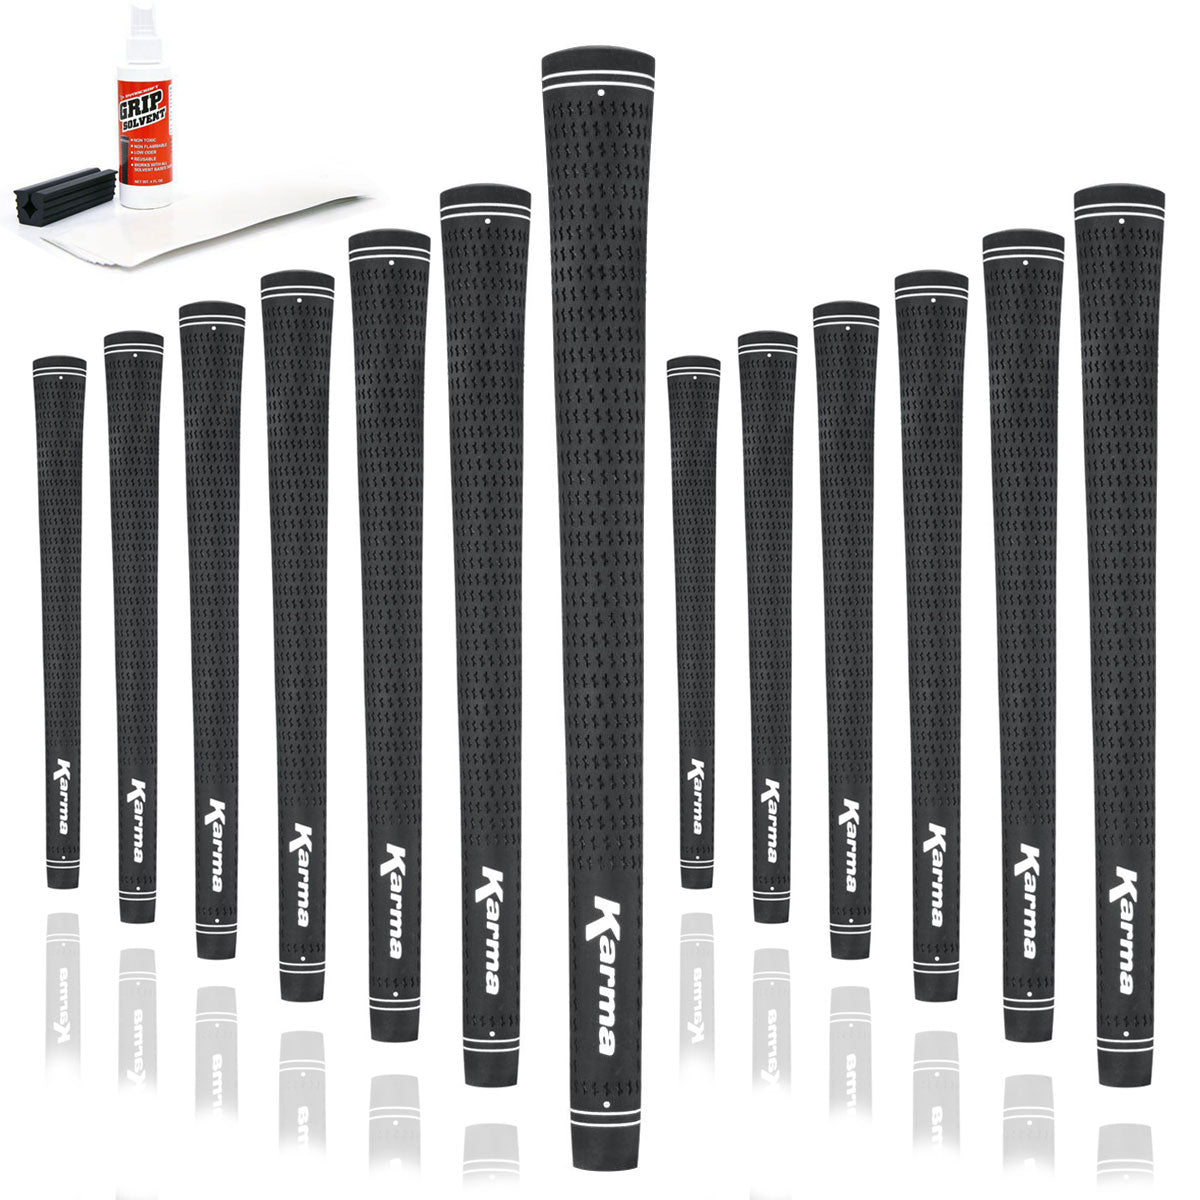 13 Karma Velour Black golf grips, golf grip tape strips, bottle of grip solvent and rubber shaft clamp